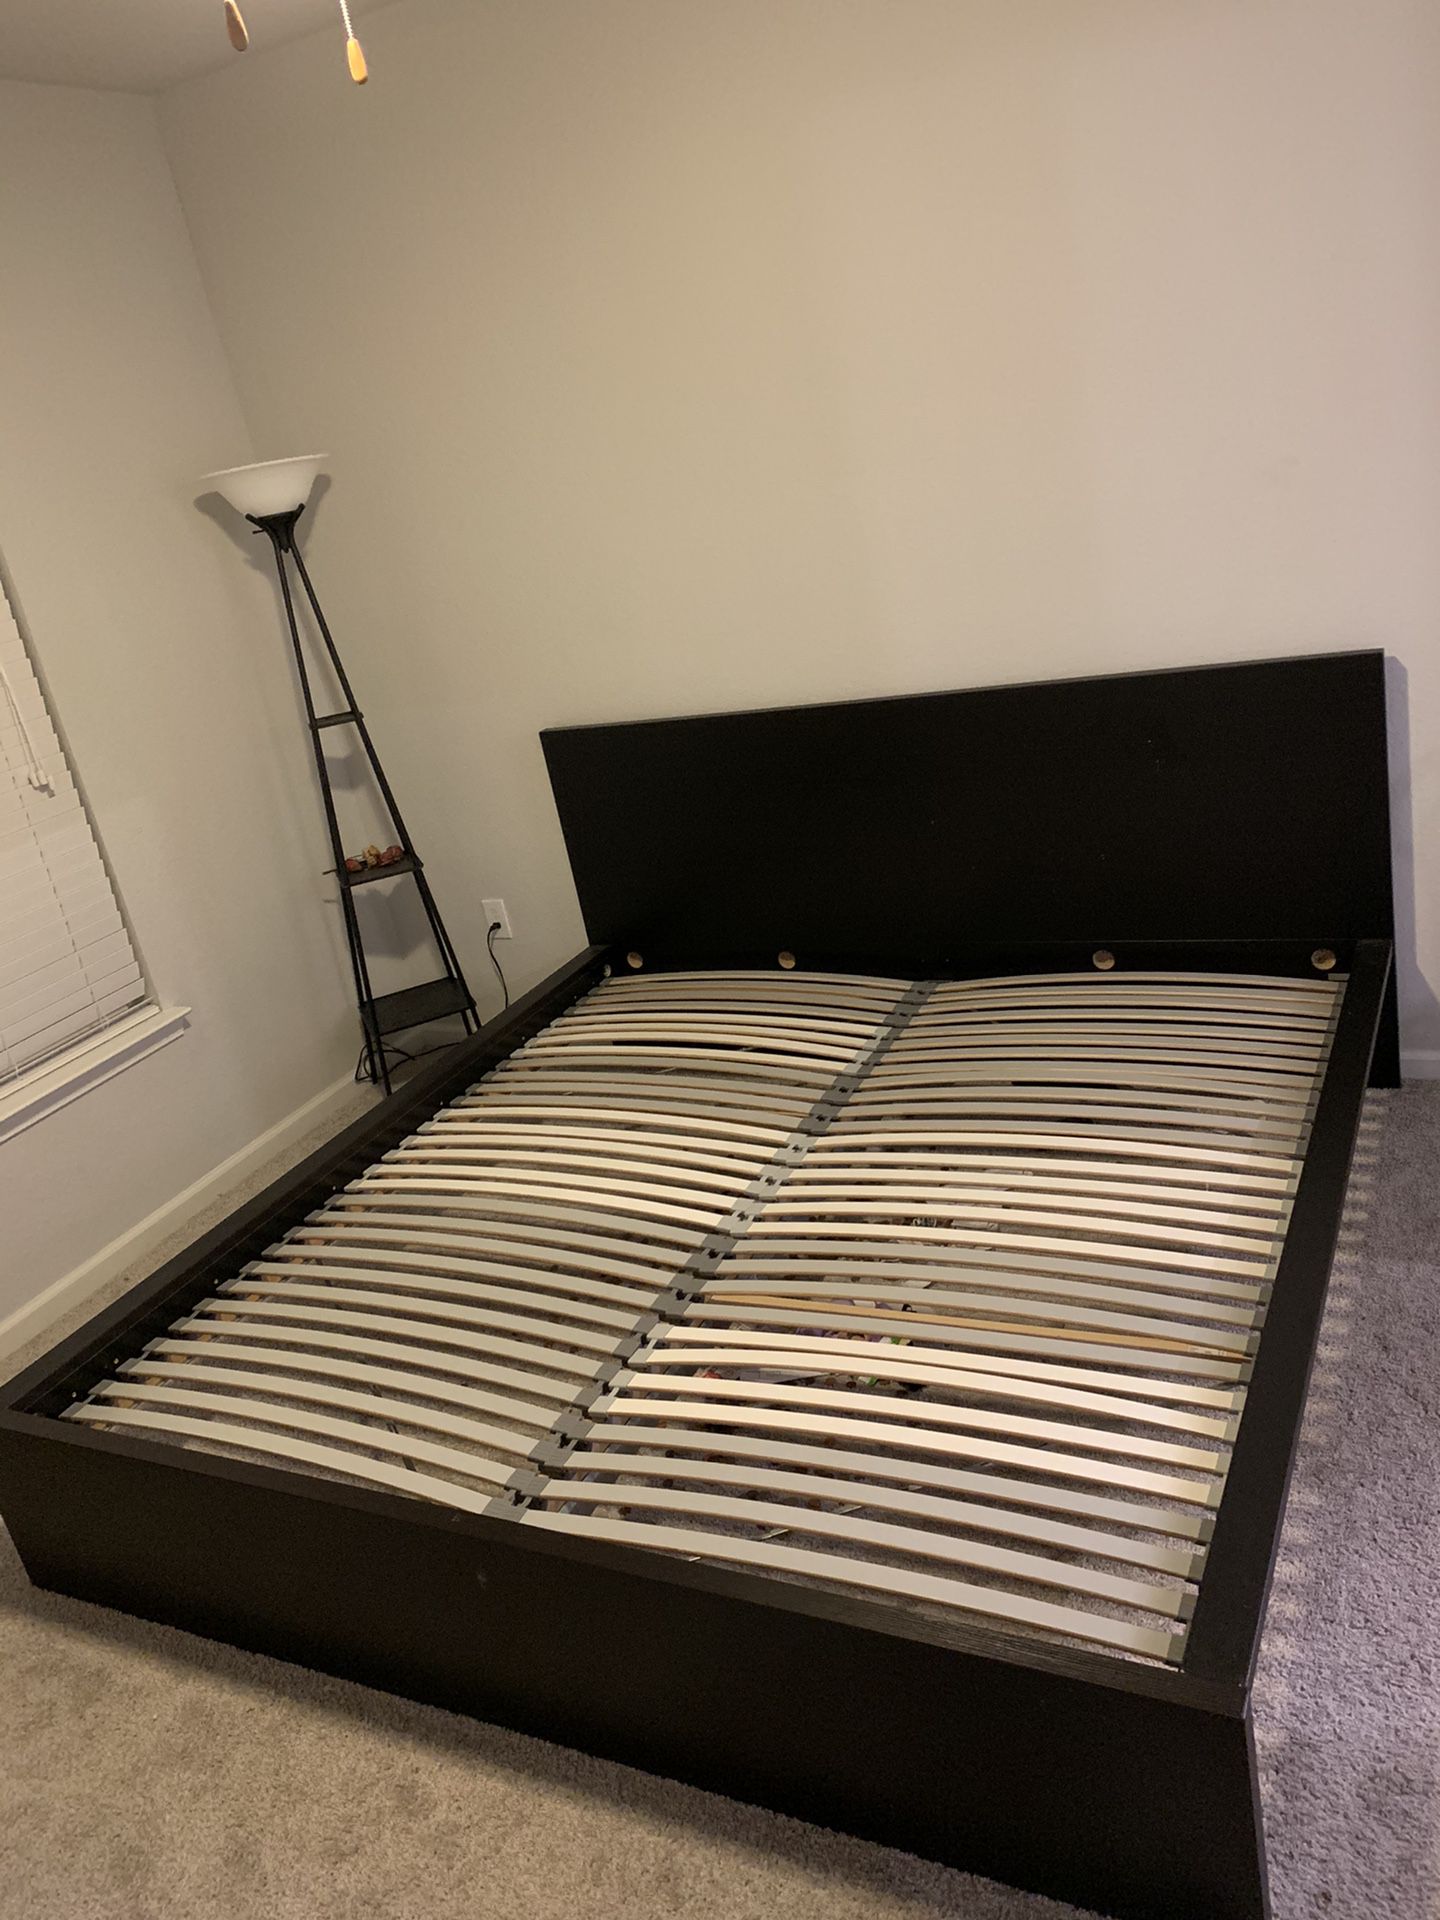 IKEA king sized bed frame for sale!